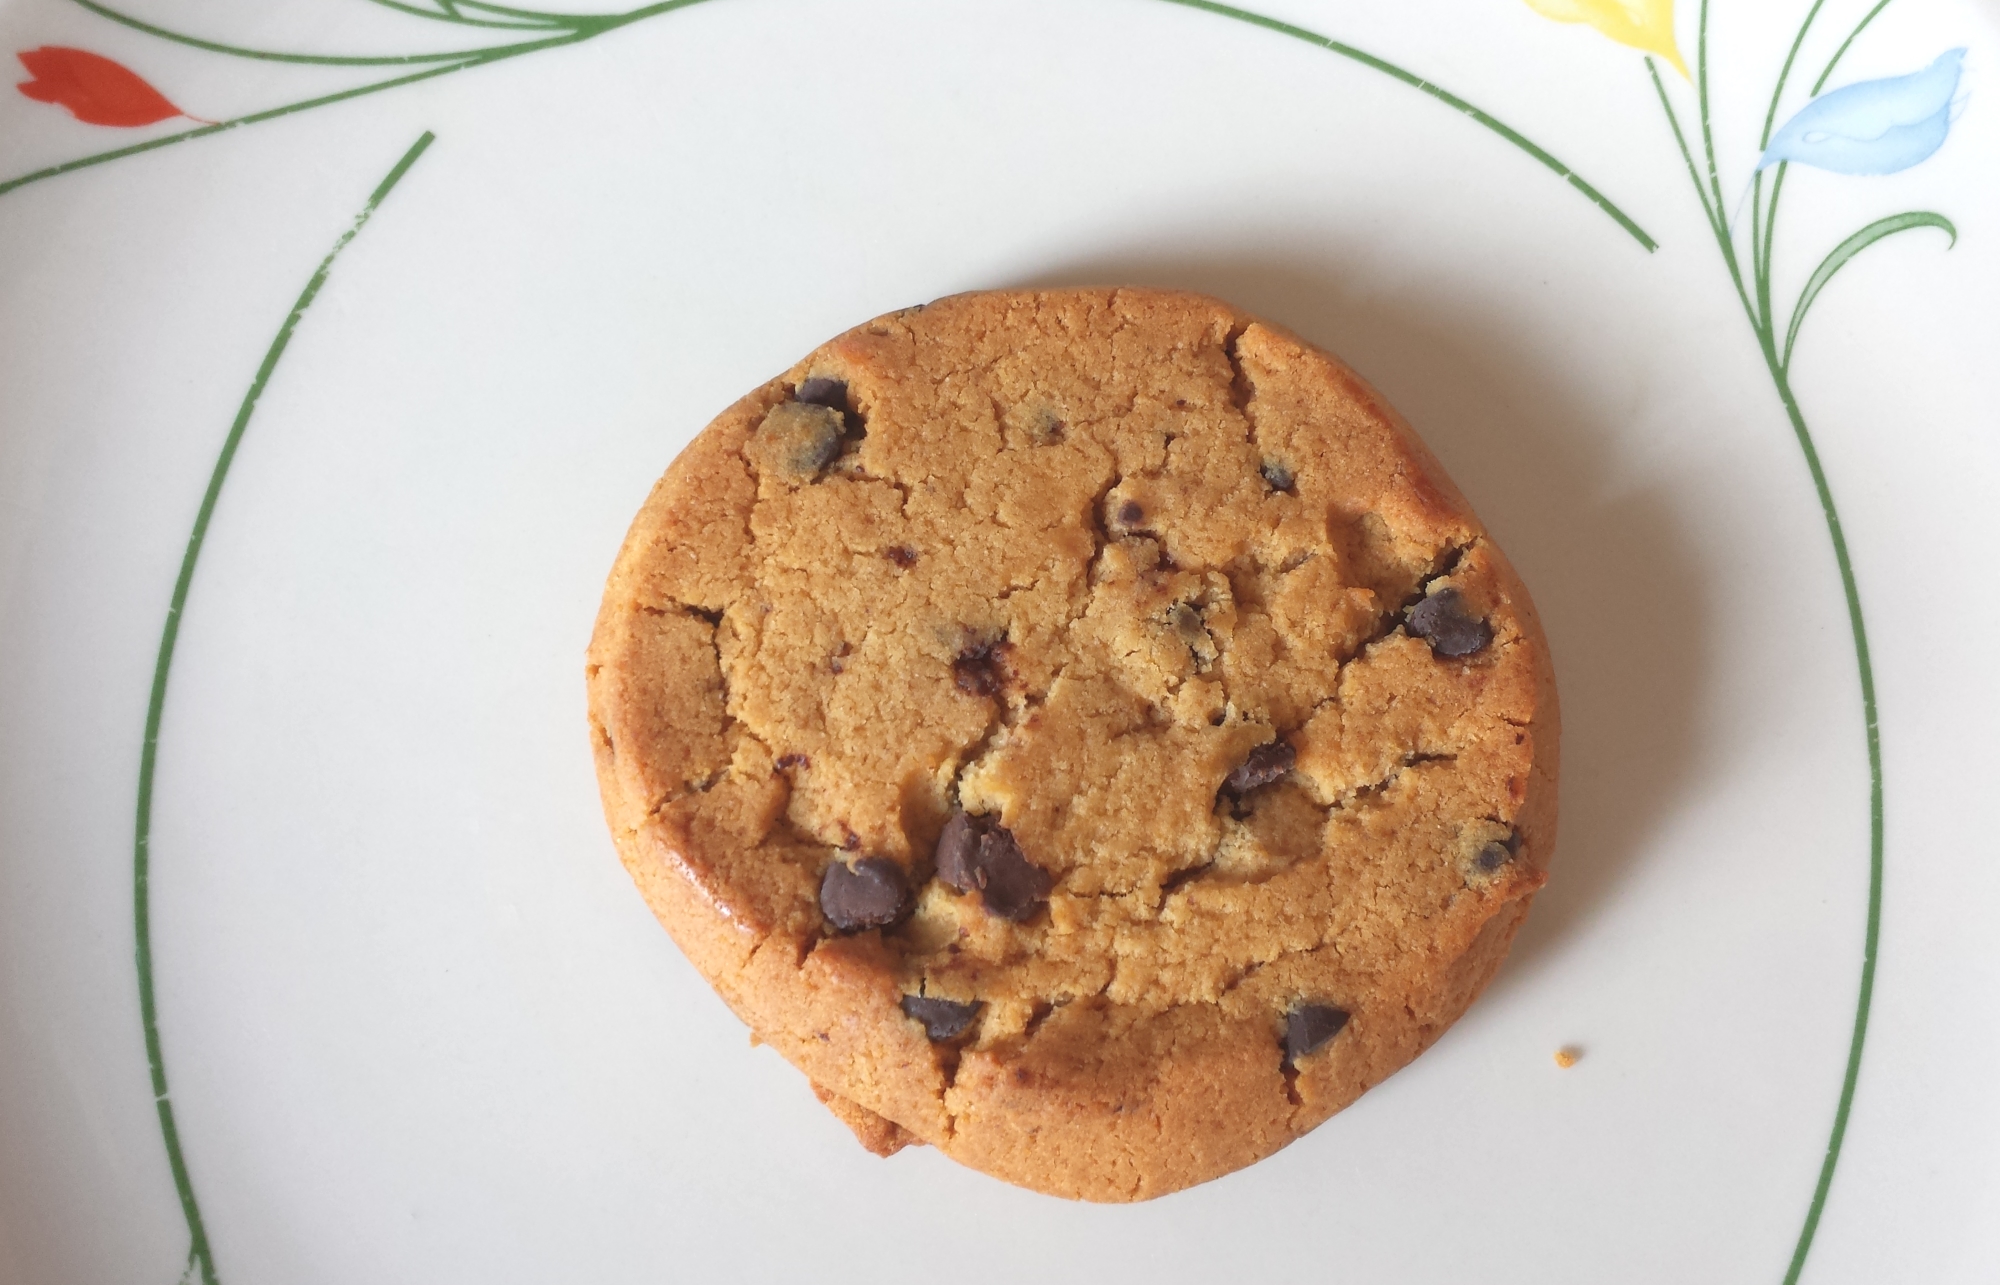 Chocolate chip protein cookie from Naked Nutrition with 10 grams of protein, 1 gram of sugar